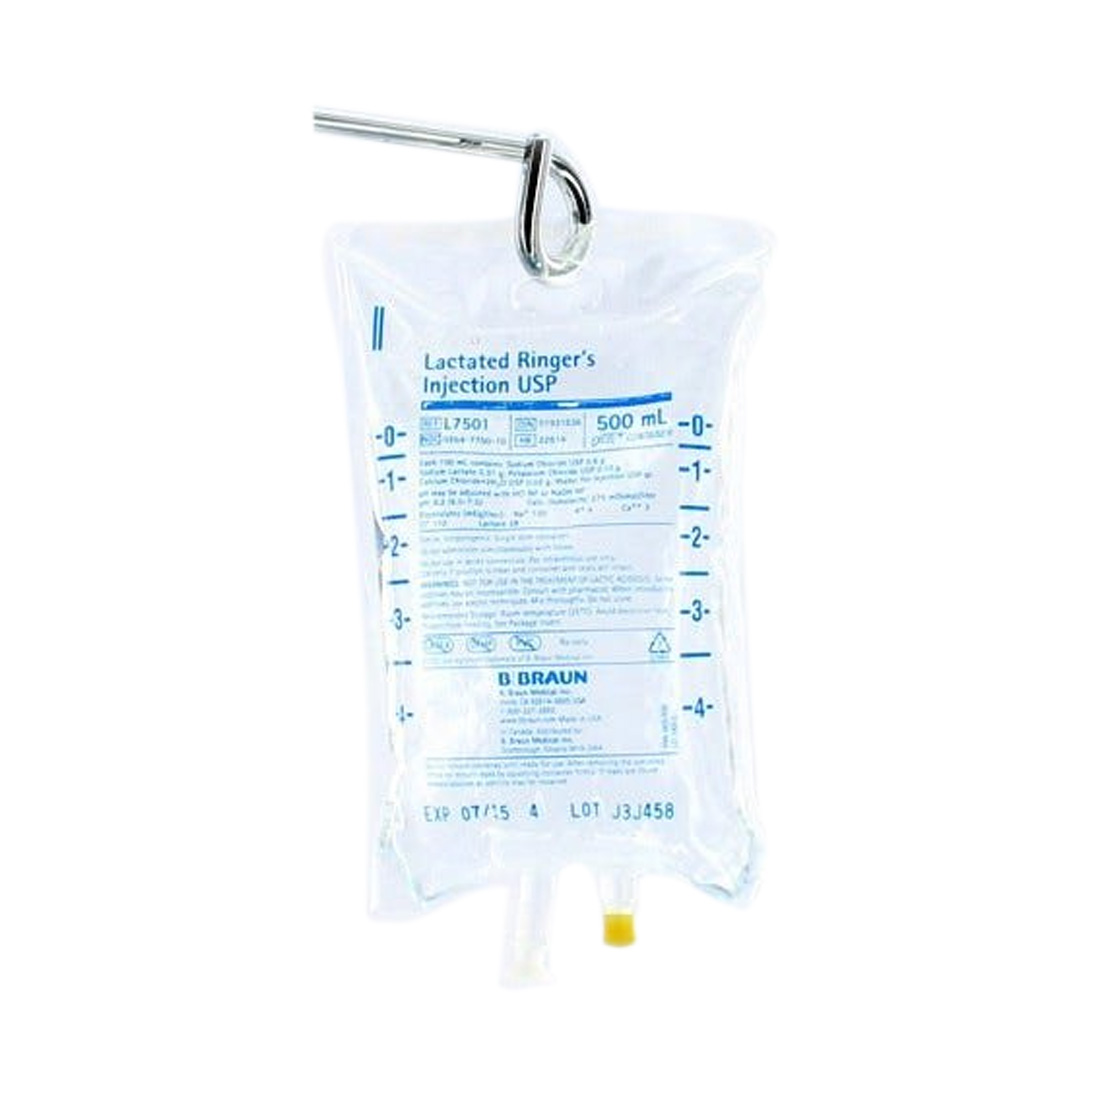 Lactated Ringer's, 500ml Plastic Bag for Injection - 24/Case